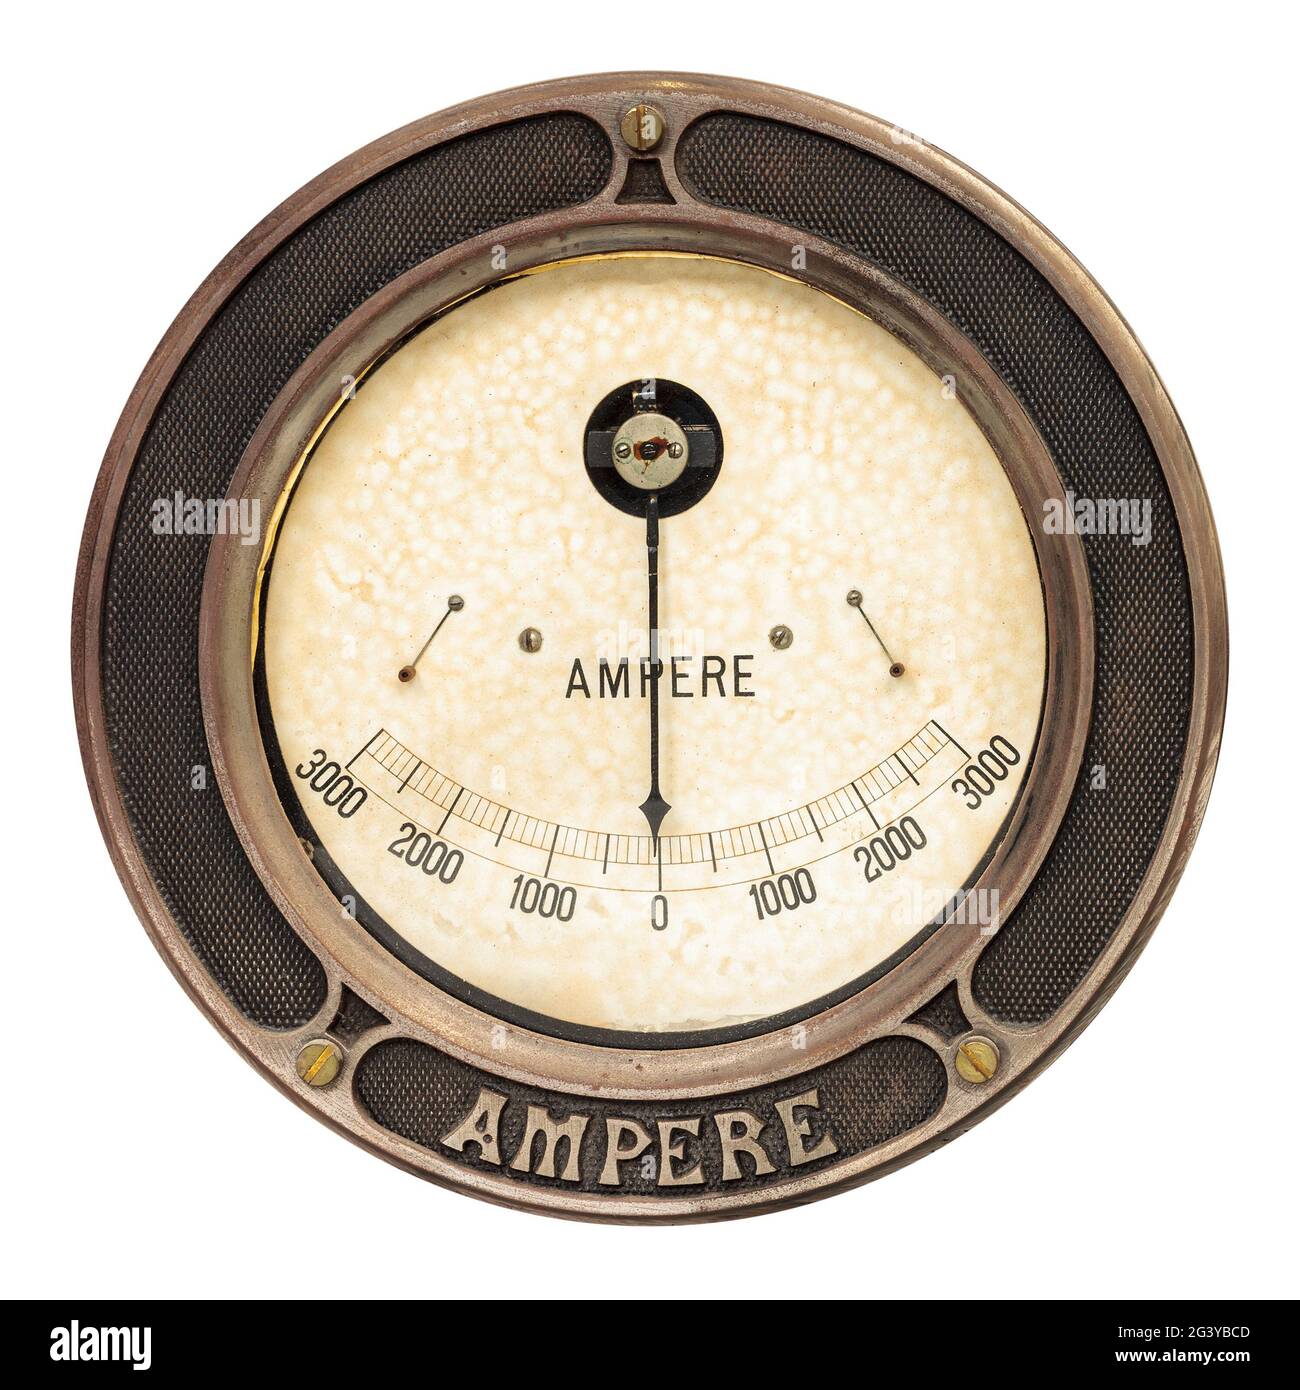 https://c8.alamy.com/comp/2G3YBCD/vintage-round-analog-ampere-meter-isolated-on-a-white-background-2G3YBCD.jpg